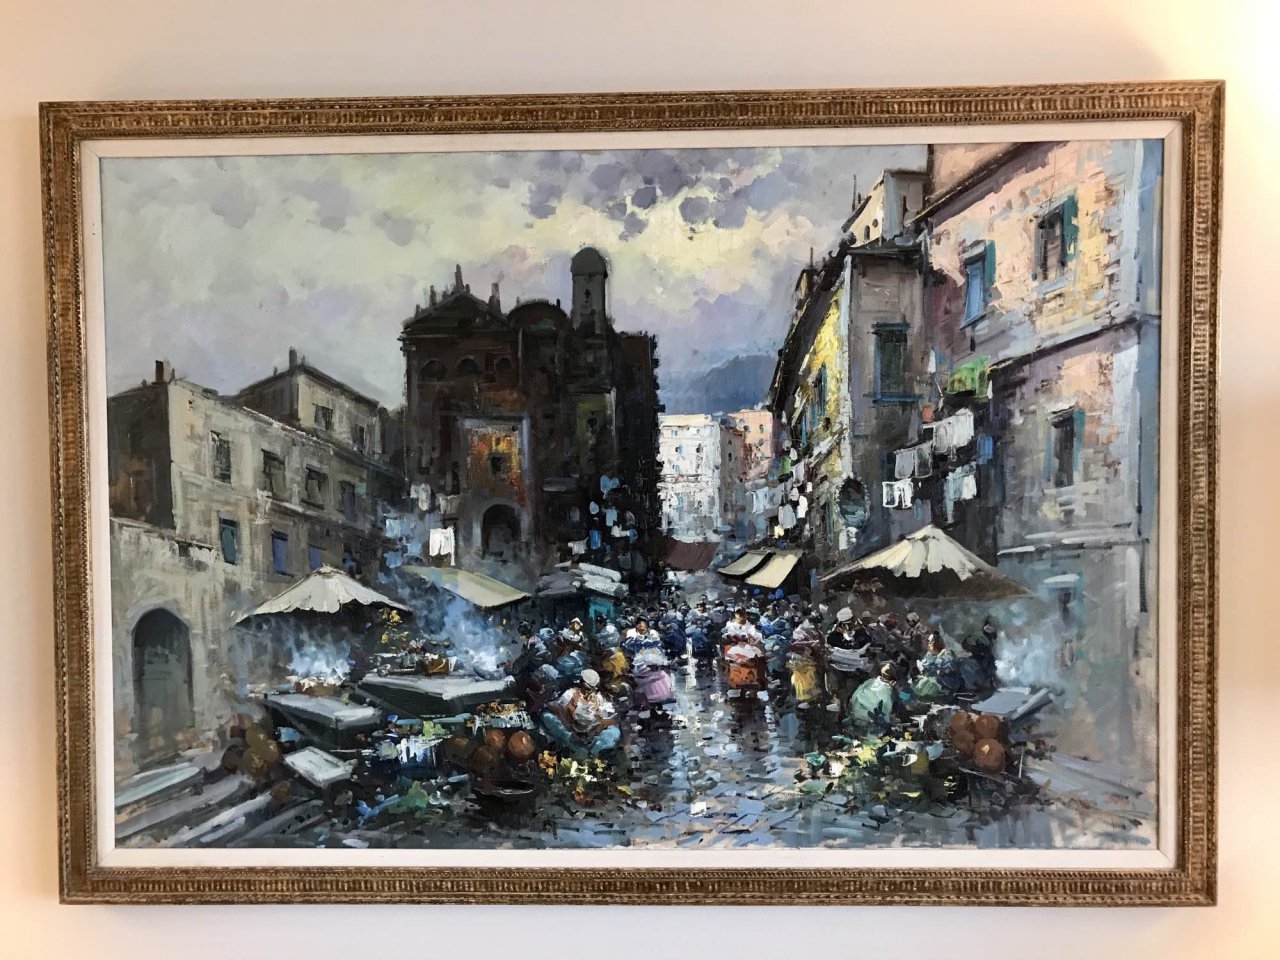 Help With Artist Of Painting? I Cannot Make Out The Signature